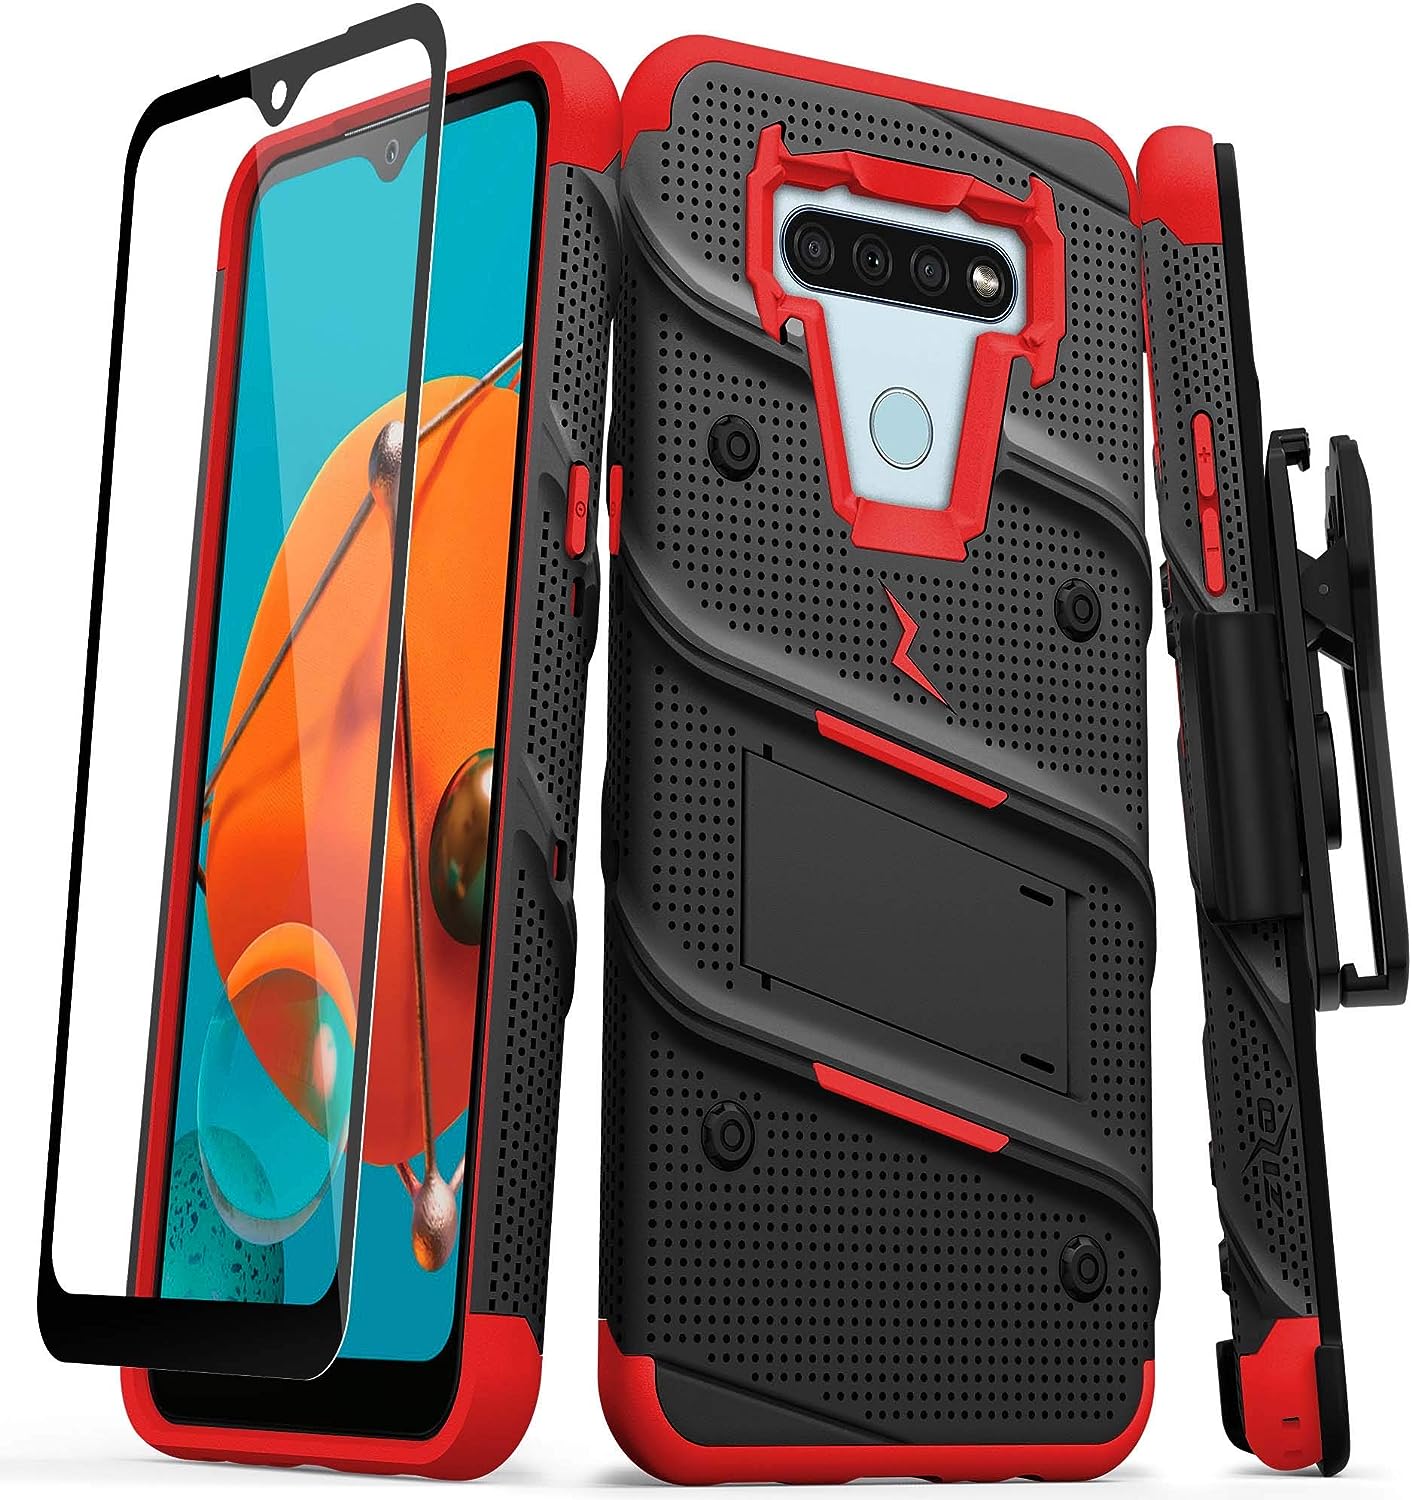 ZIZO Bolt LG K51 / LG Reflect Holster Case with Built-in Kickstand, Screen Protector & Lanyard - Black & Red